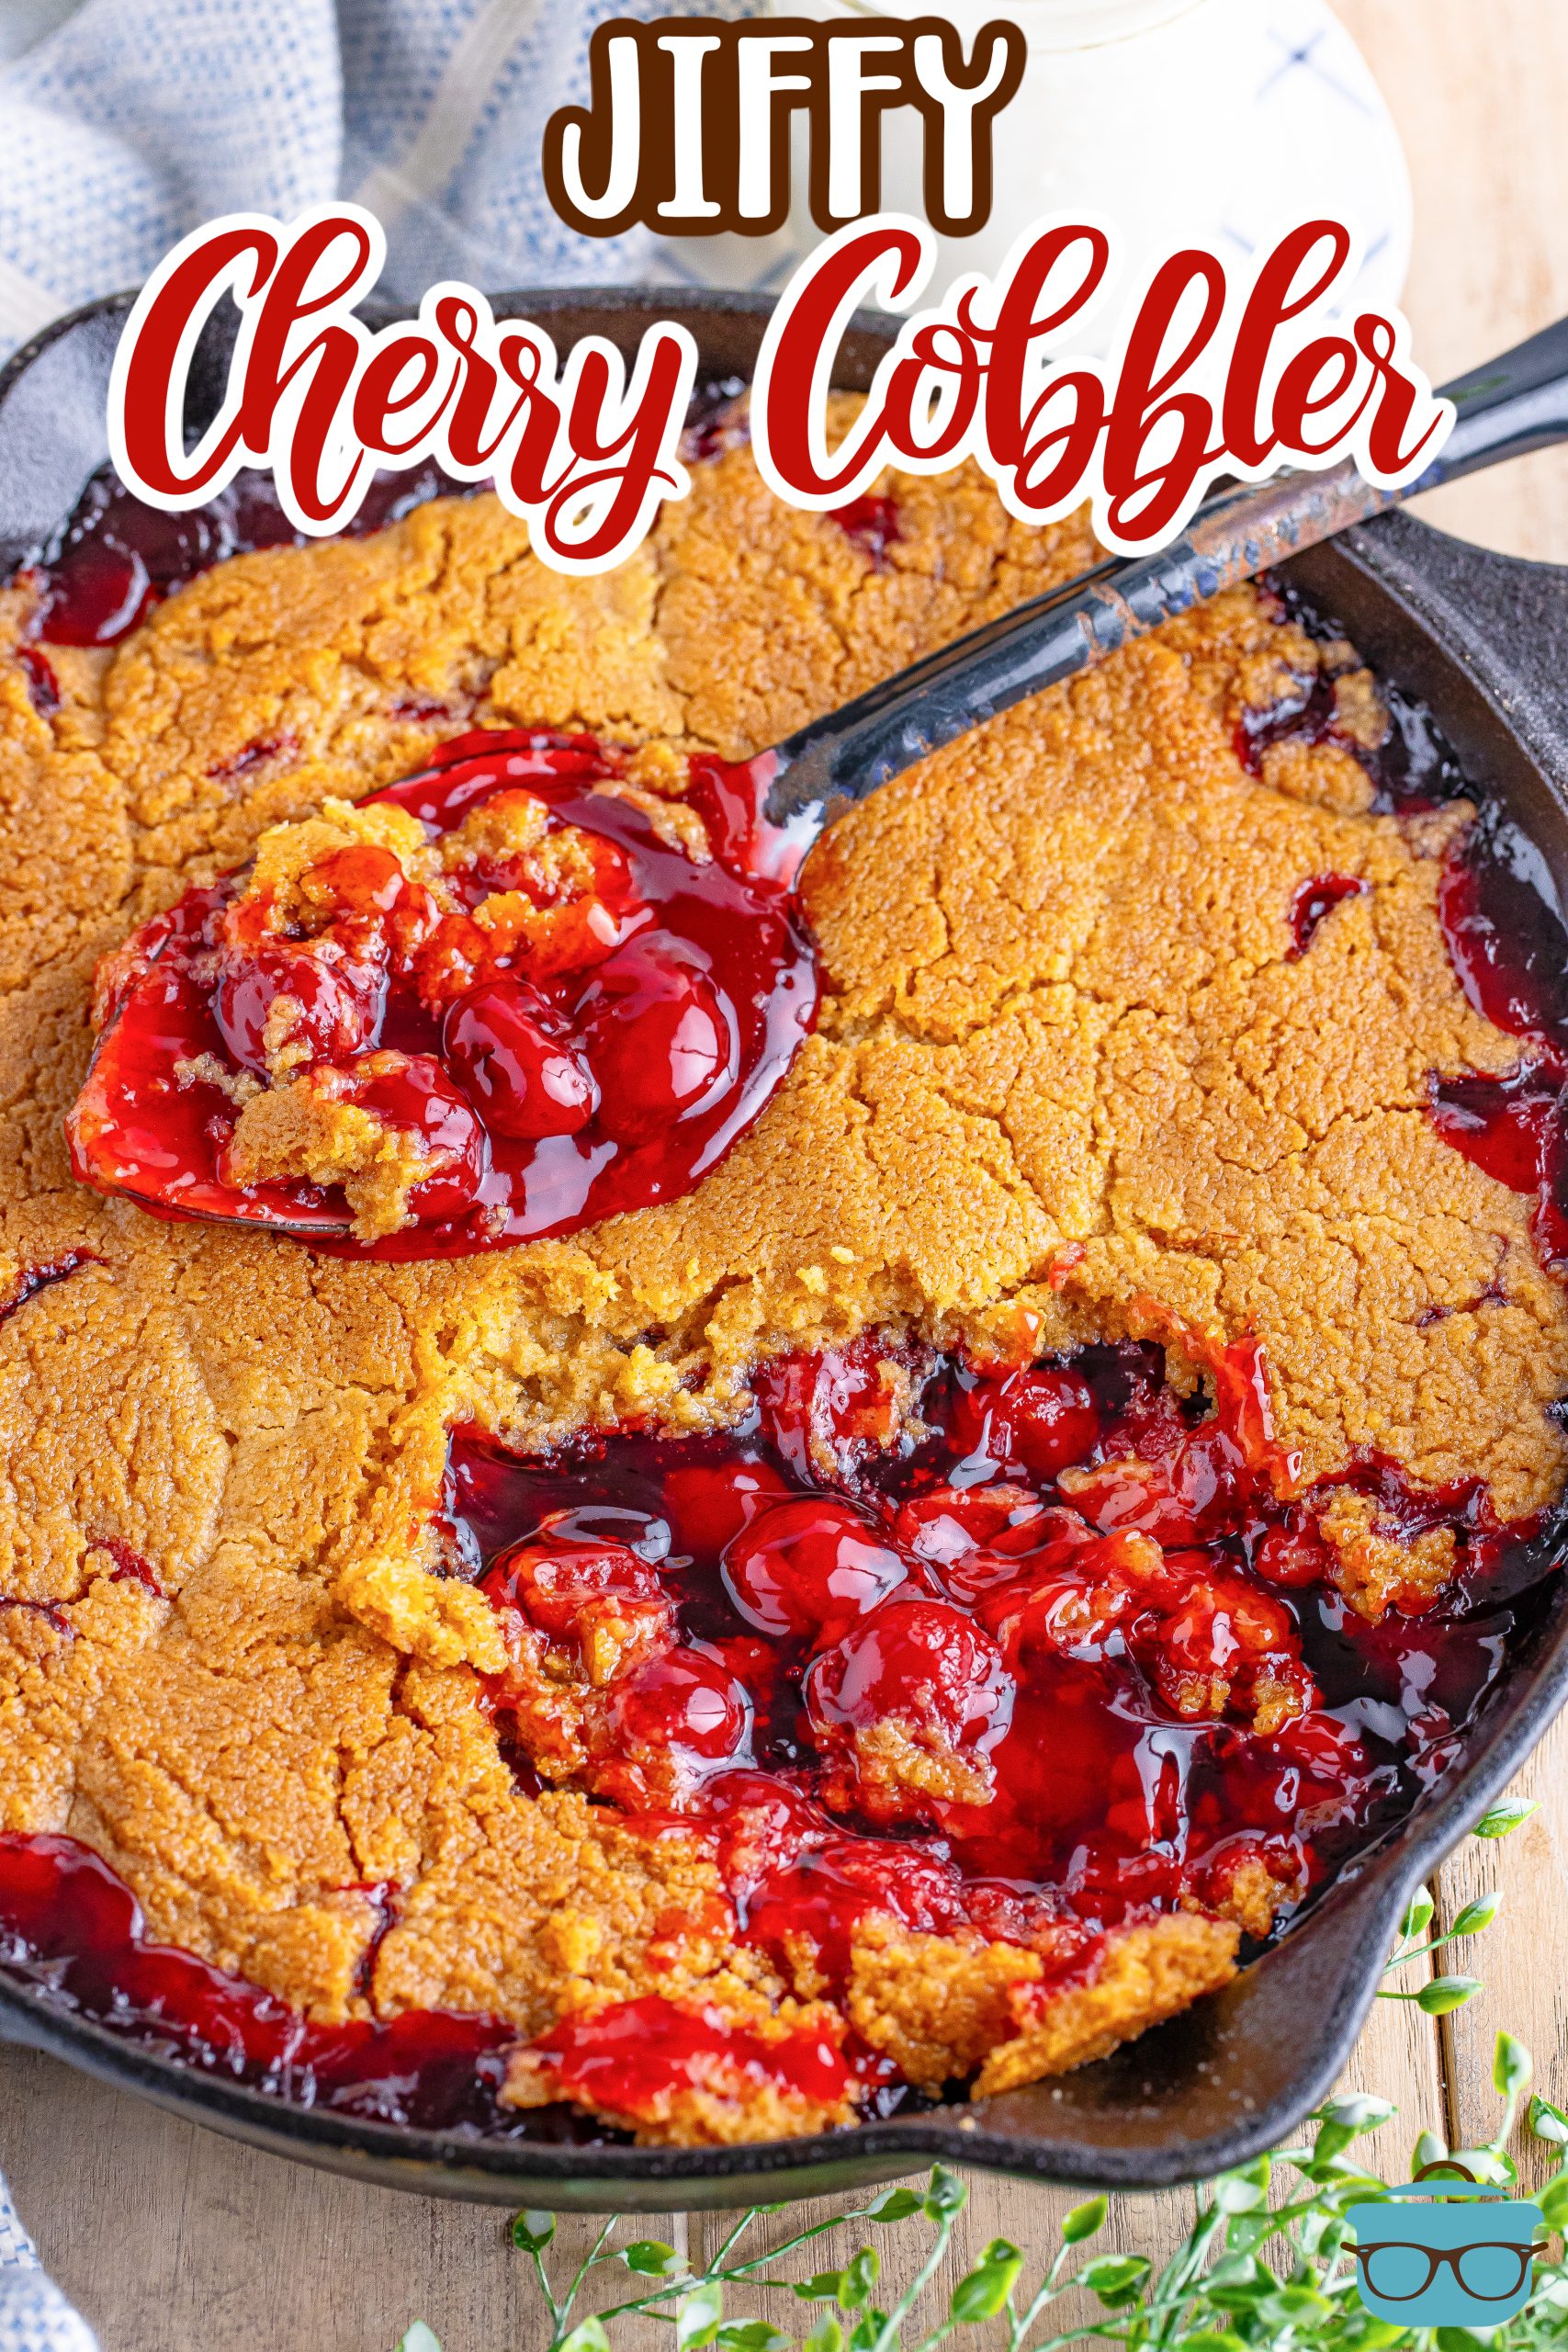 A skillet with Jiffy Cherry Cobbler.